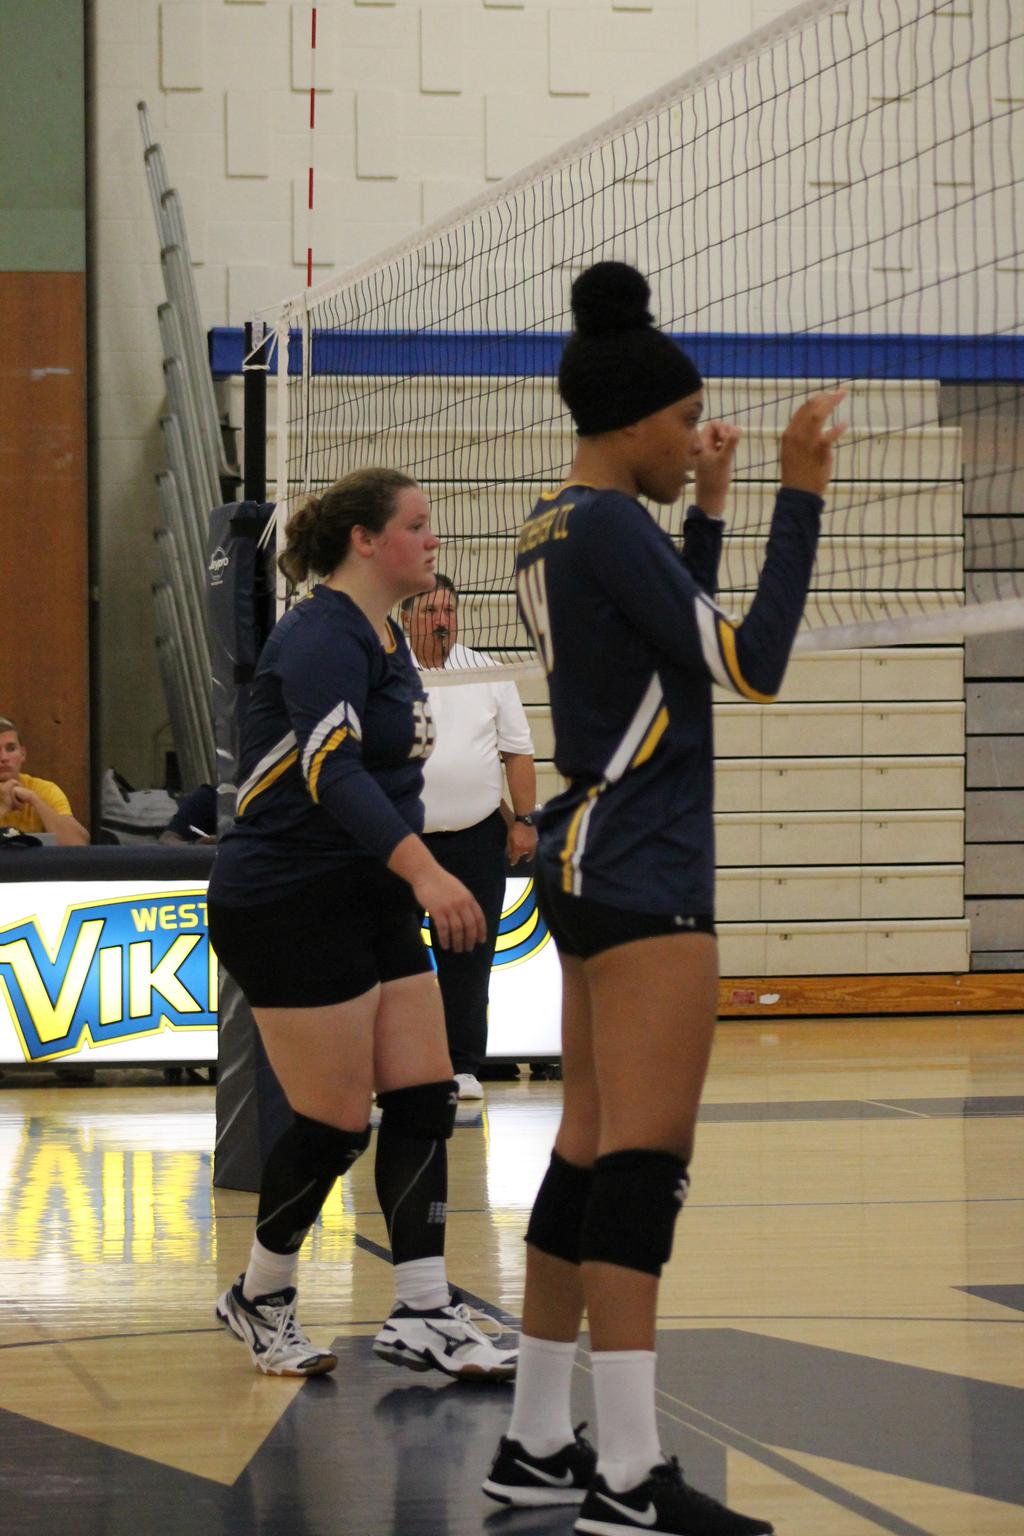 WOMEN'S VOLLEYBALL The Westchester Community College Women's Volleyball team enjoyed a solid 2017 campaign, finishing with a 7-10 record in Region XV play.